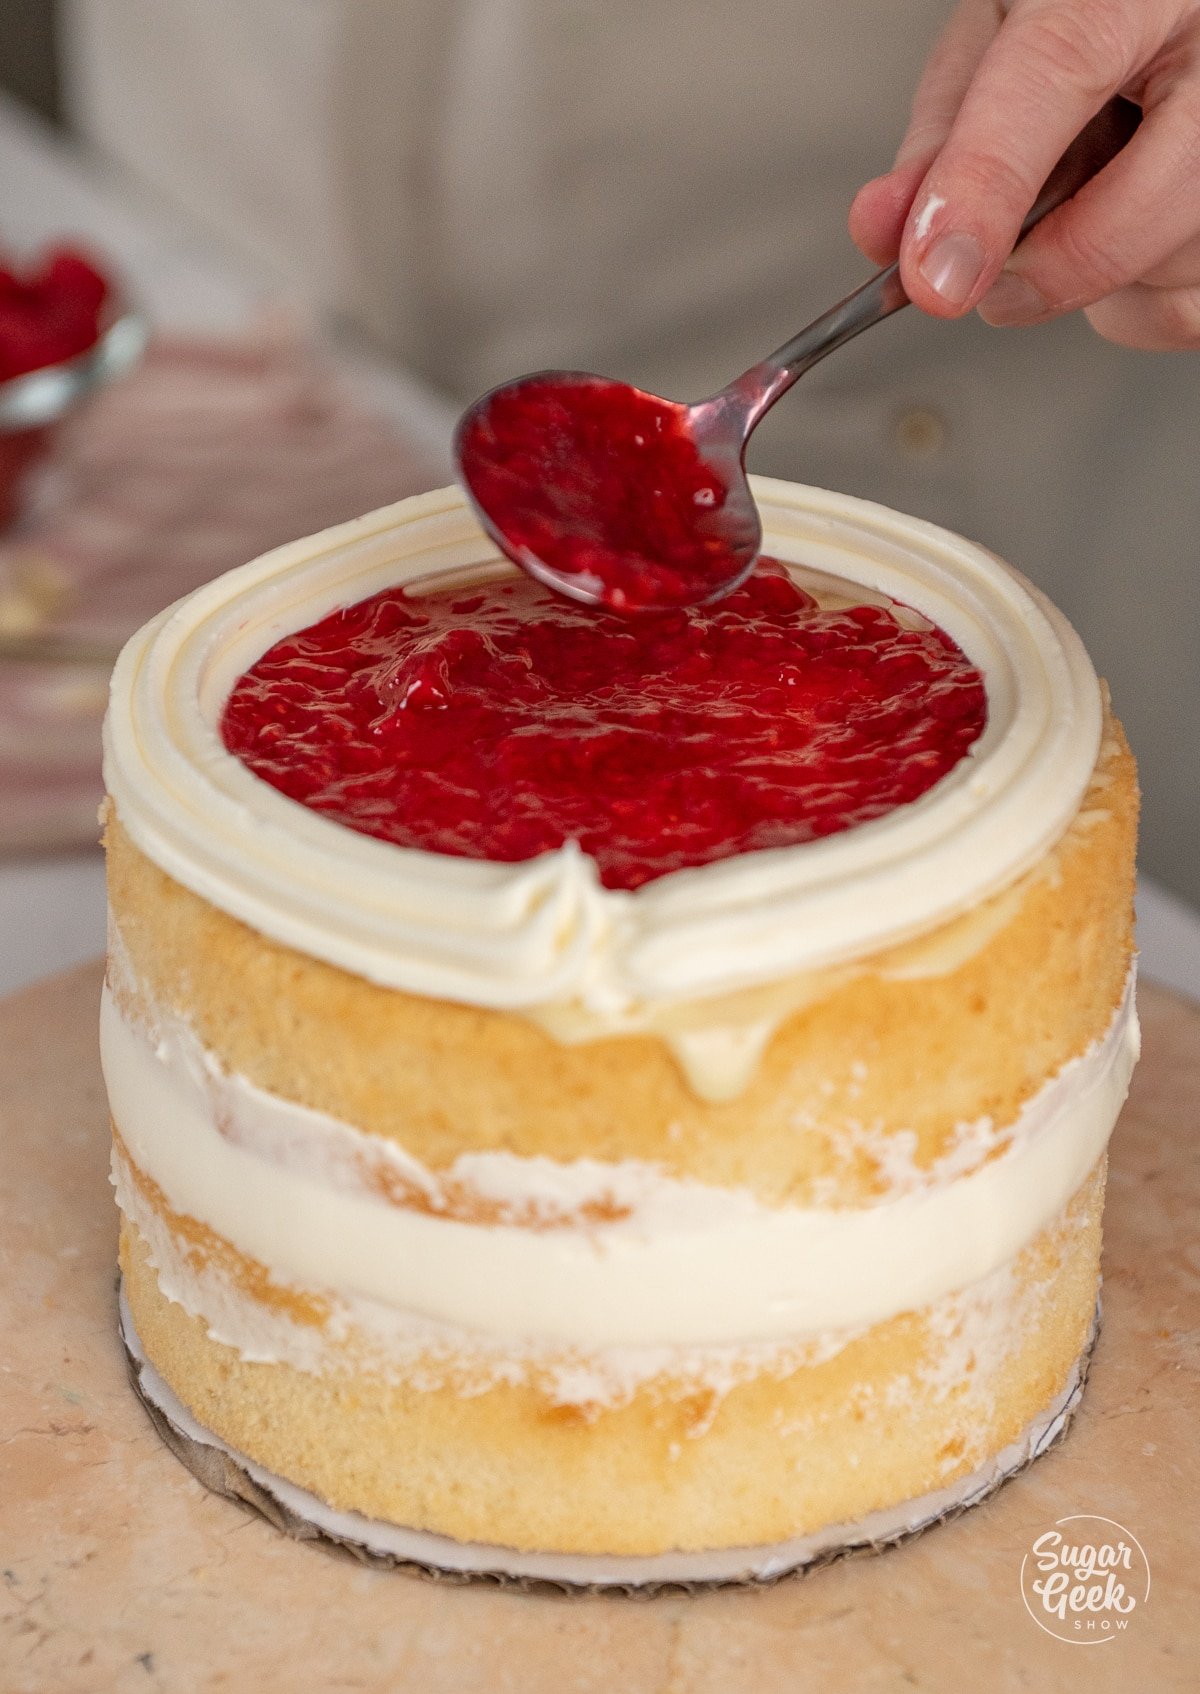 spoon spreading raspberry filling on a second cake layer.